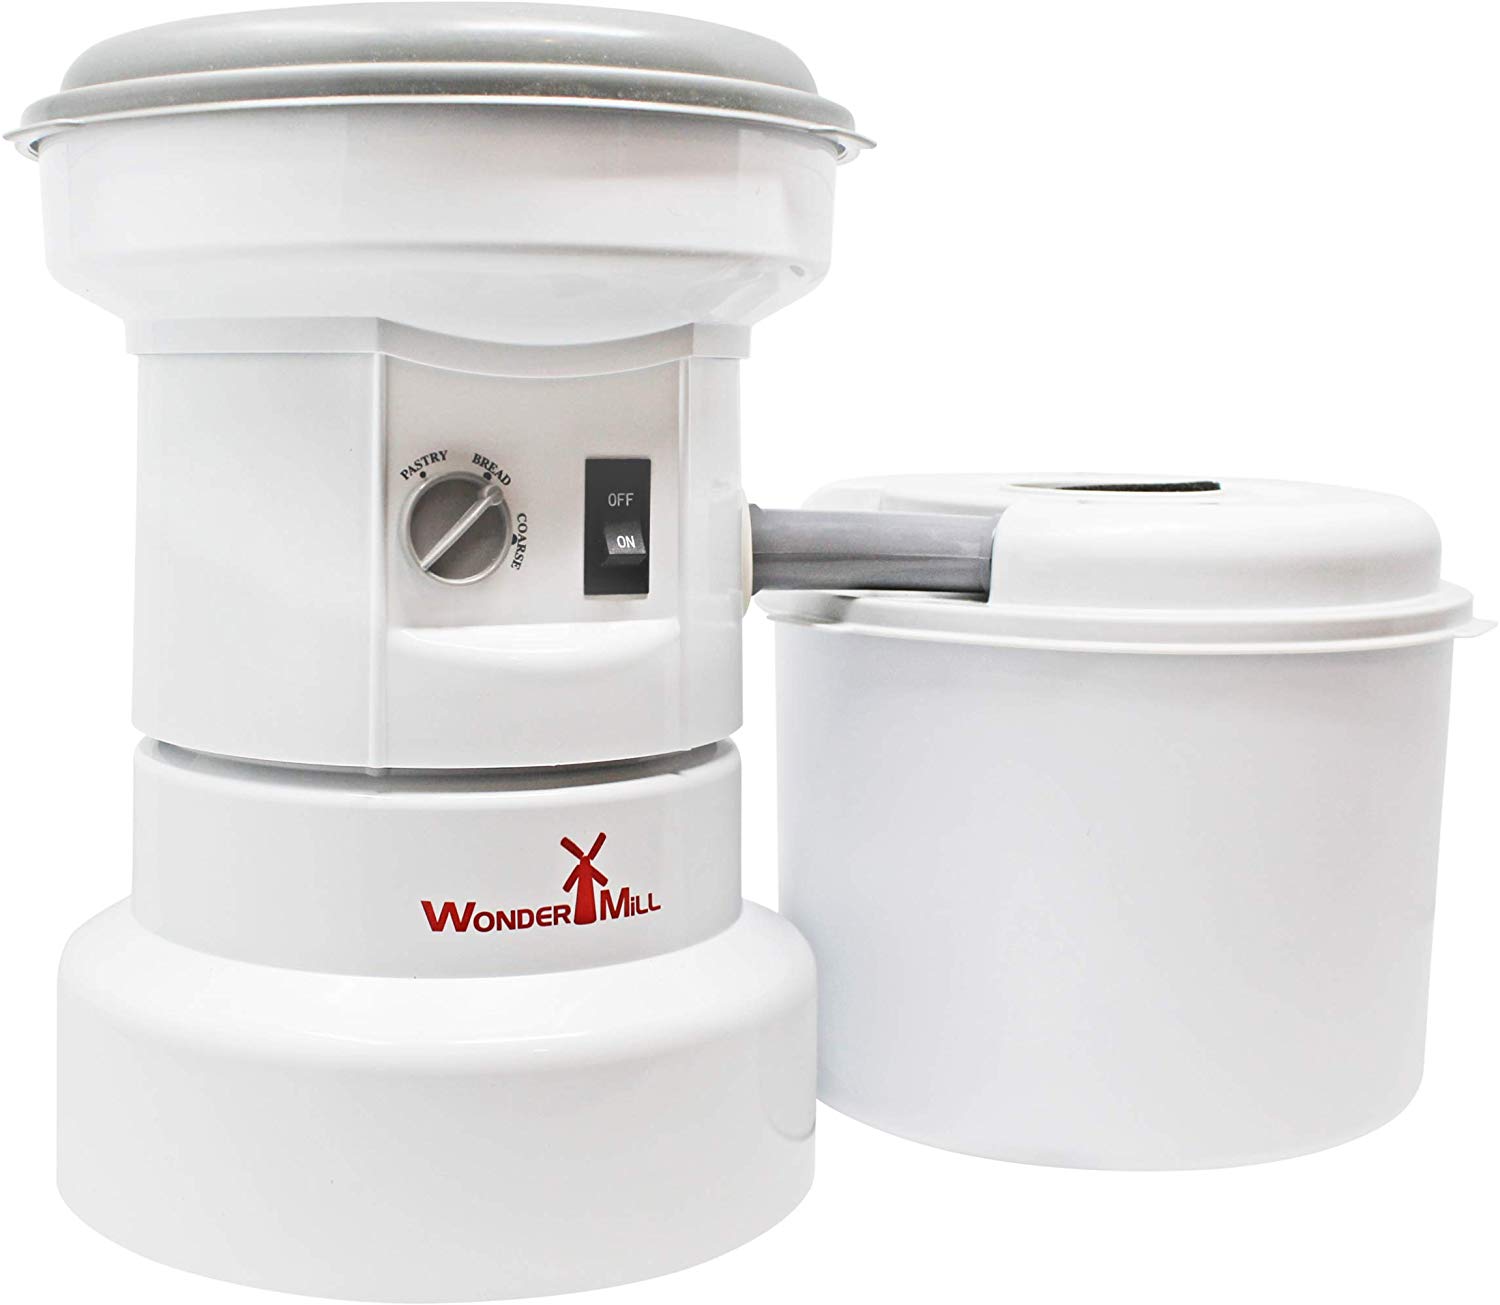 Review of Powerful Electric Grain Mill Grinder for Home and Professional Use by Wondermill